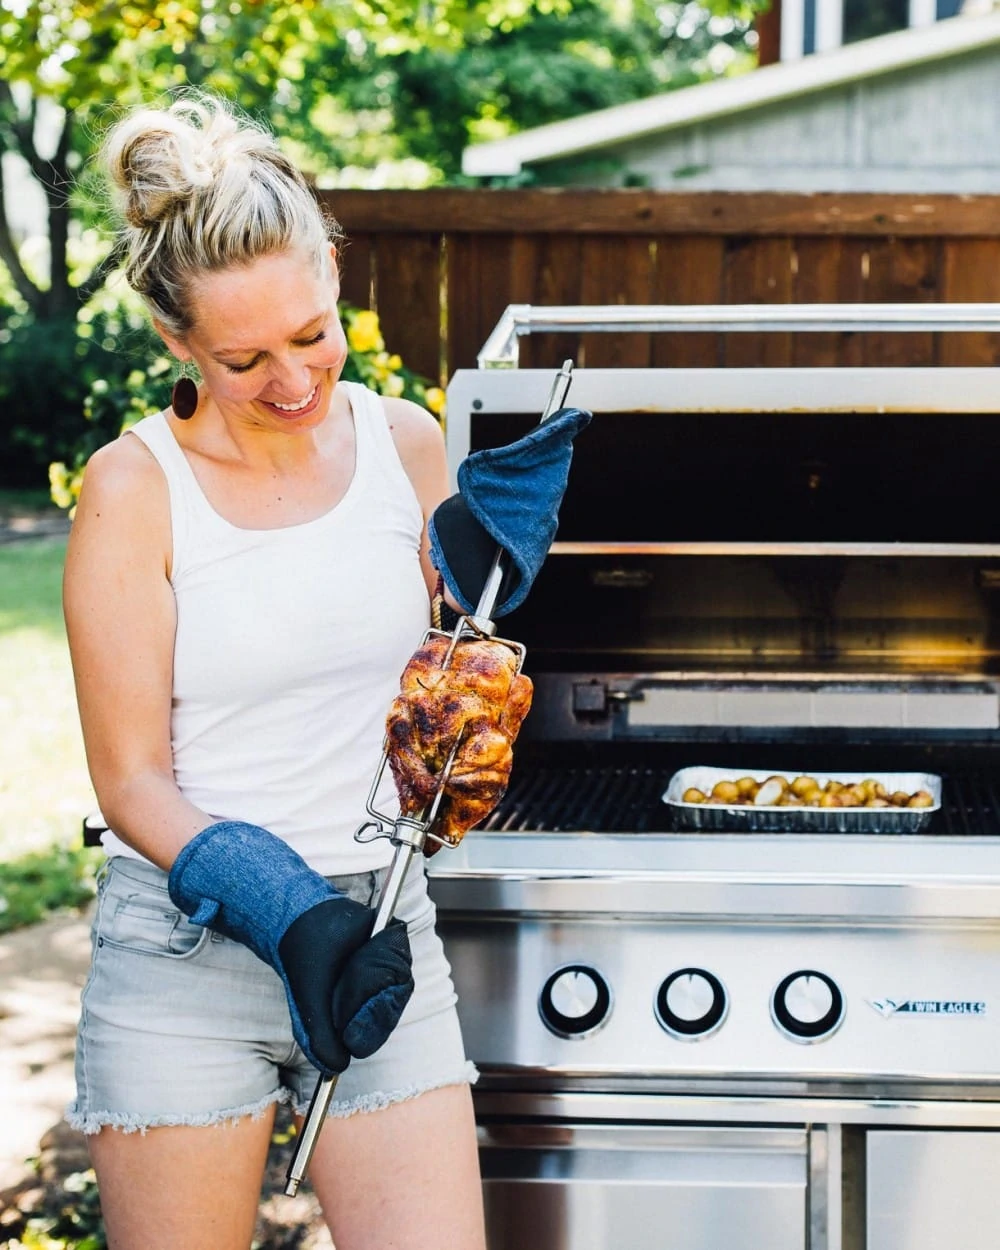 girl holding a rotisserie chicken attached to a spit, open grill in backround